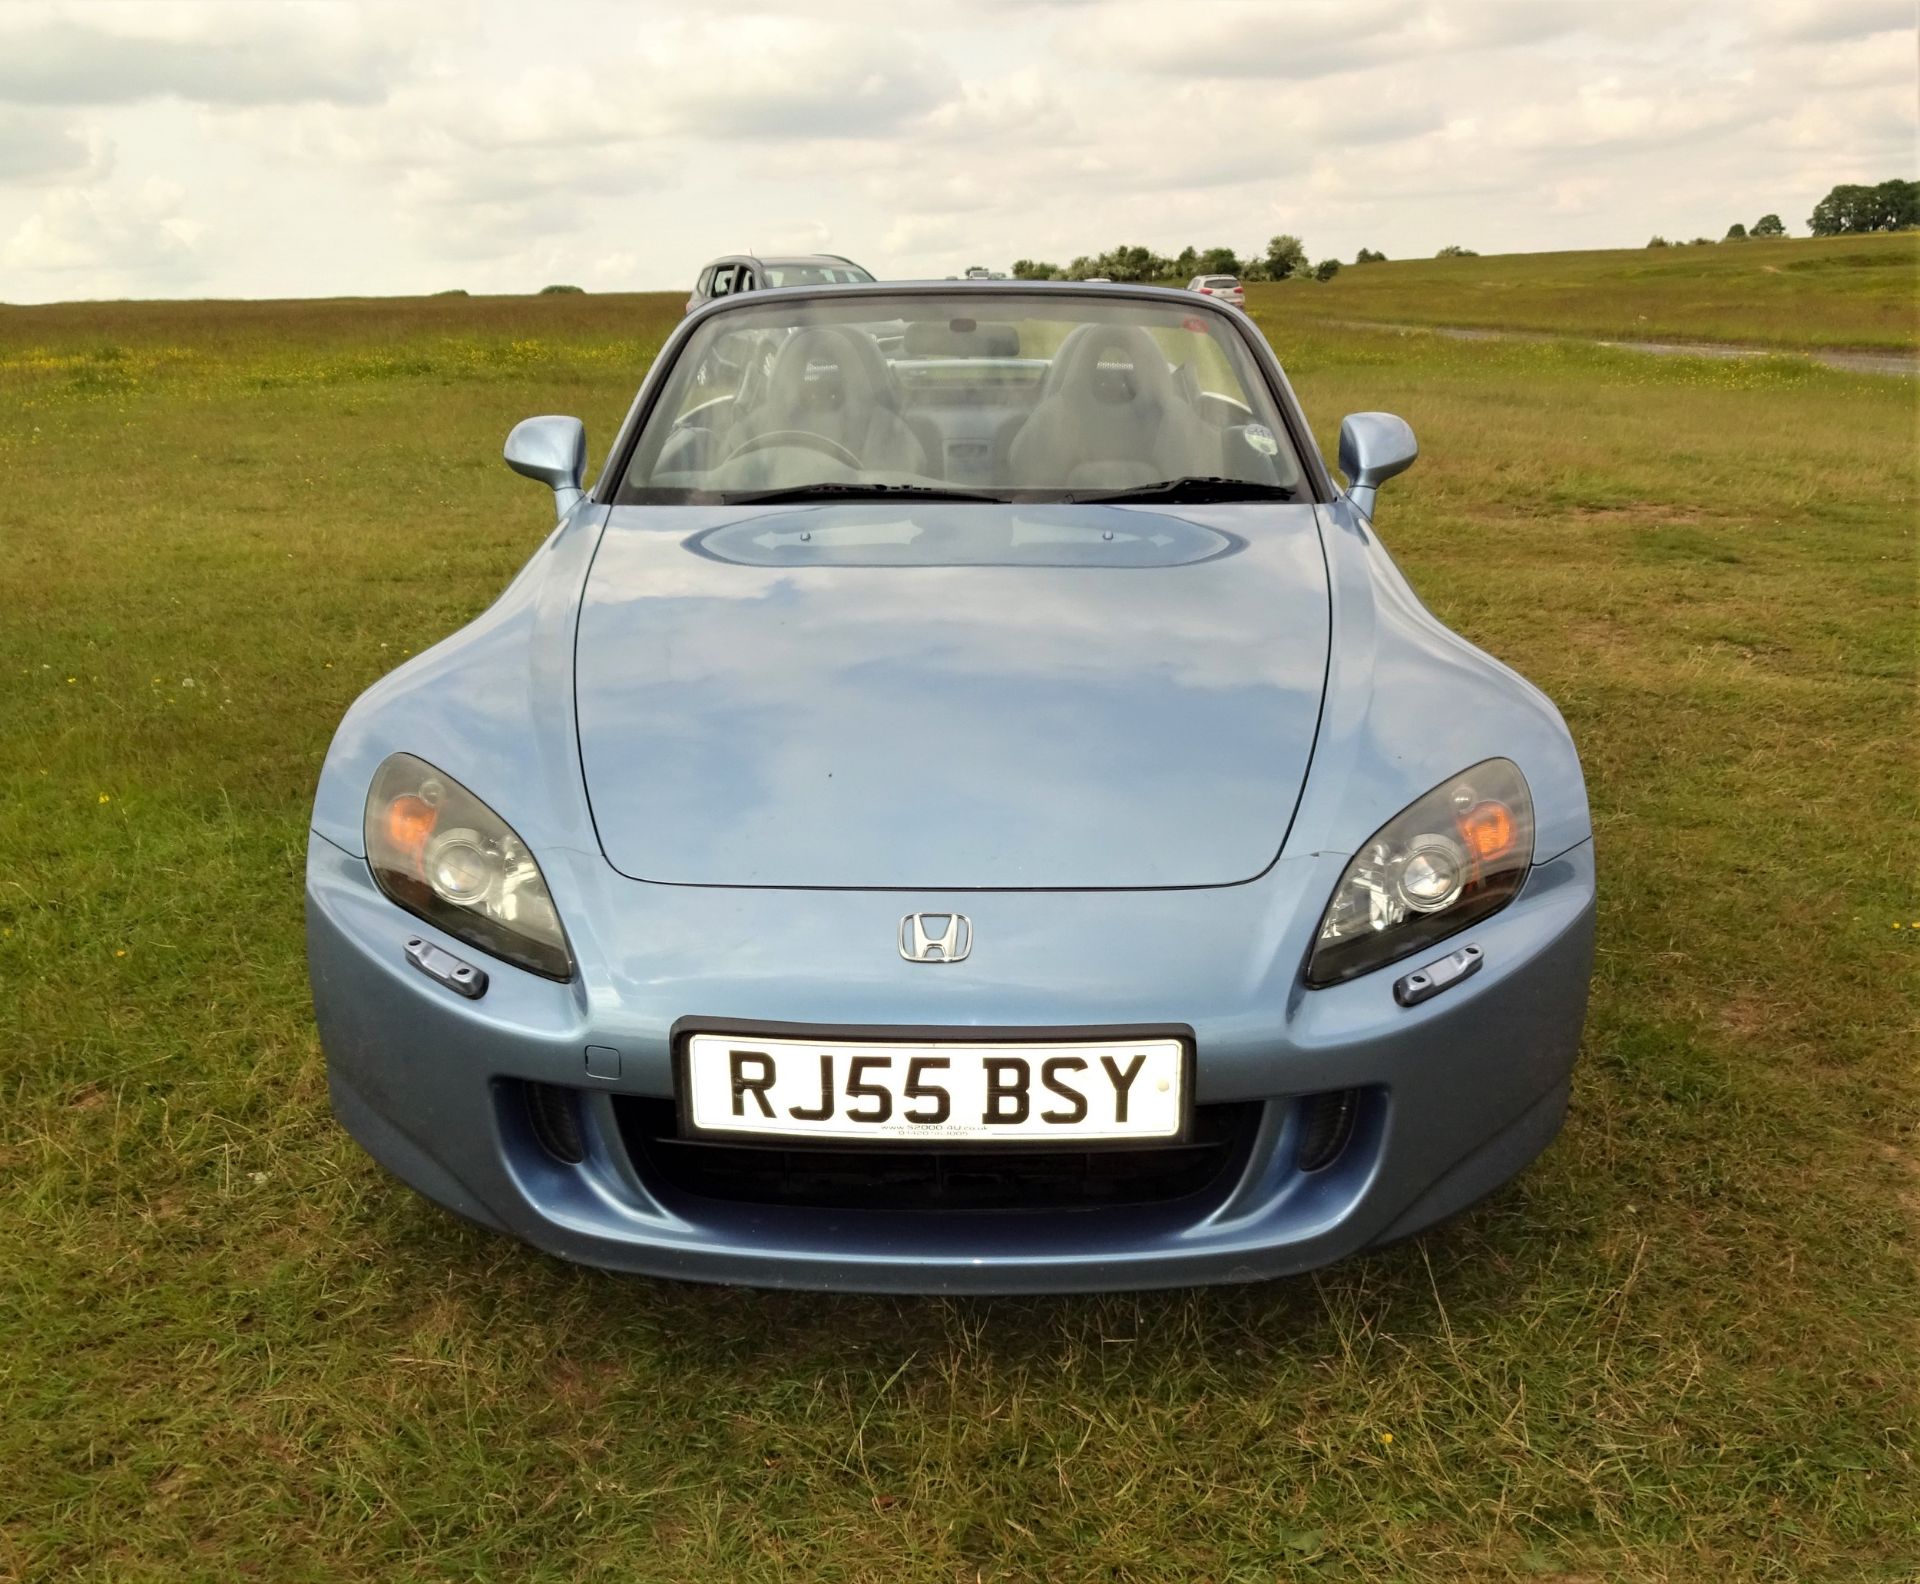 2005 HONDA S2000 Registration Number: RJ55 BSY Chassis Number: JHMPA11305S202028 - In current - Bild 6 aus 15